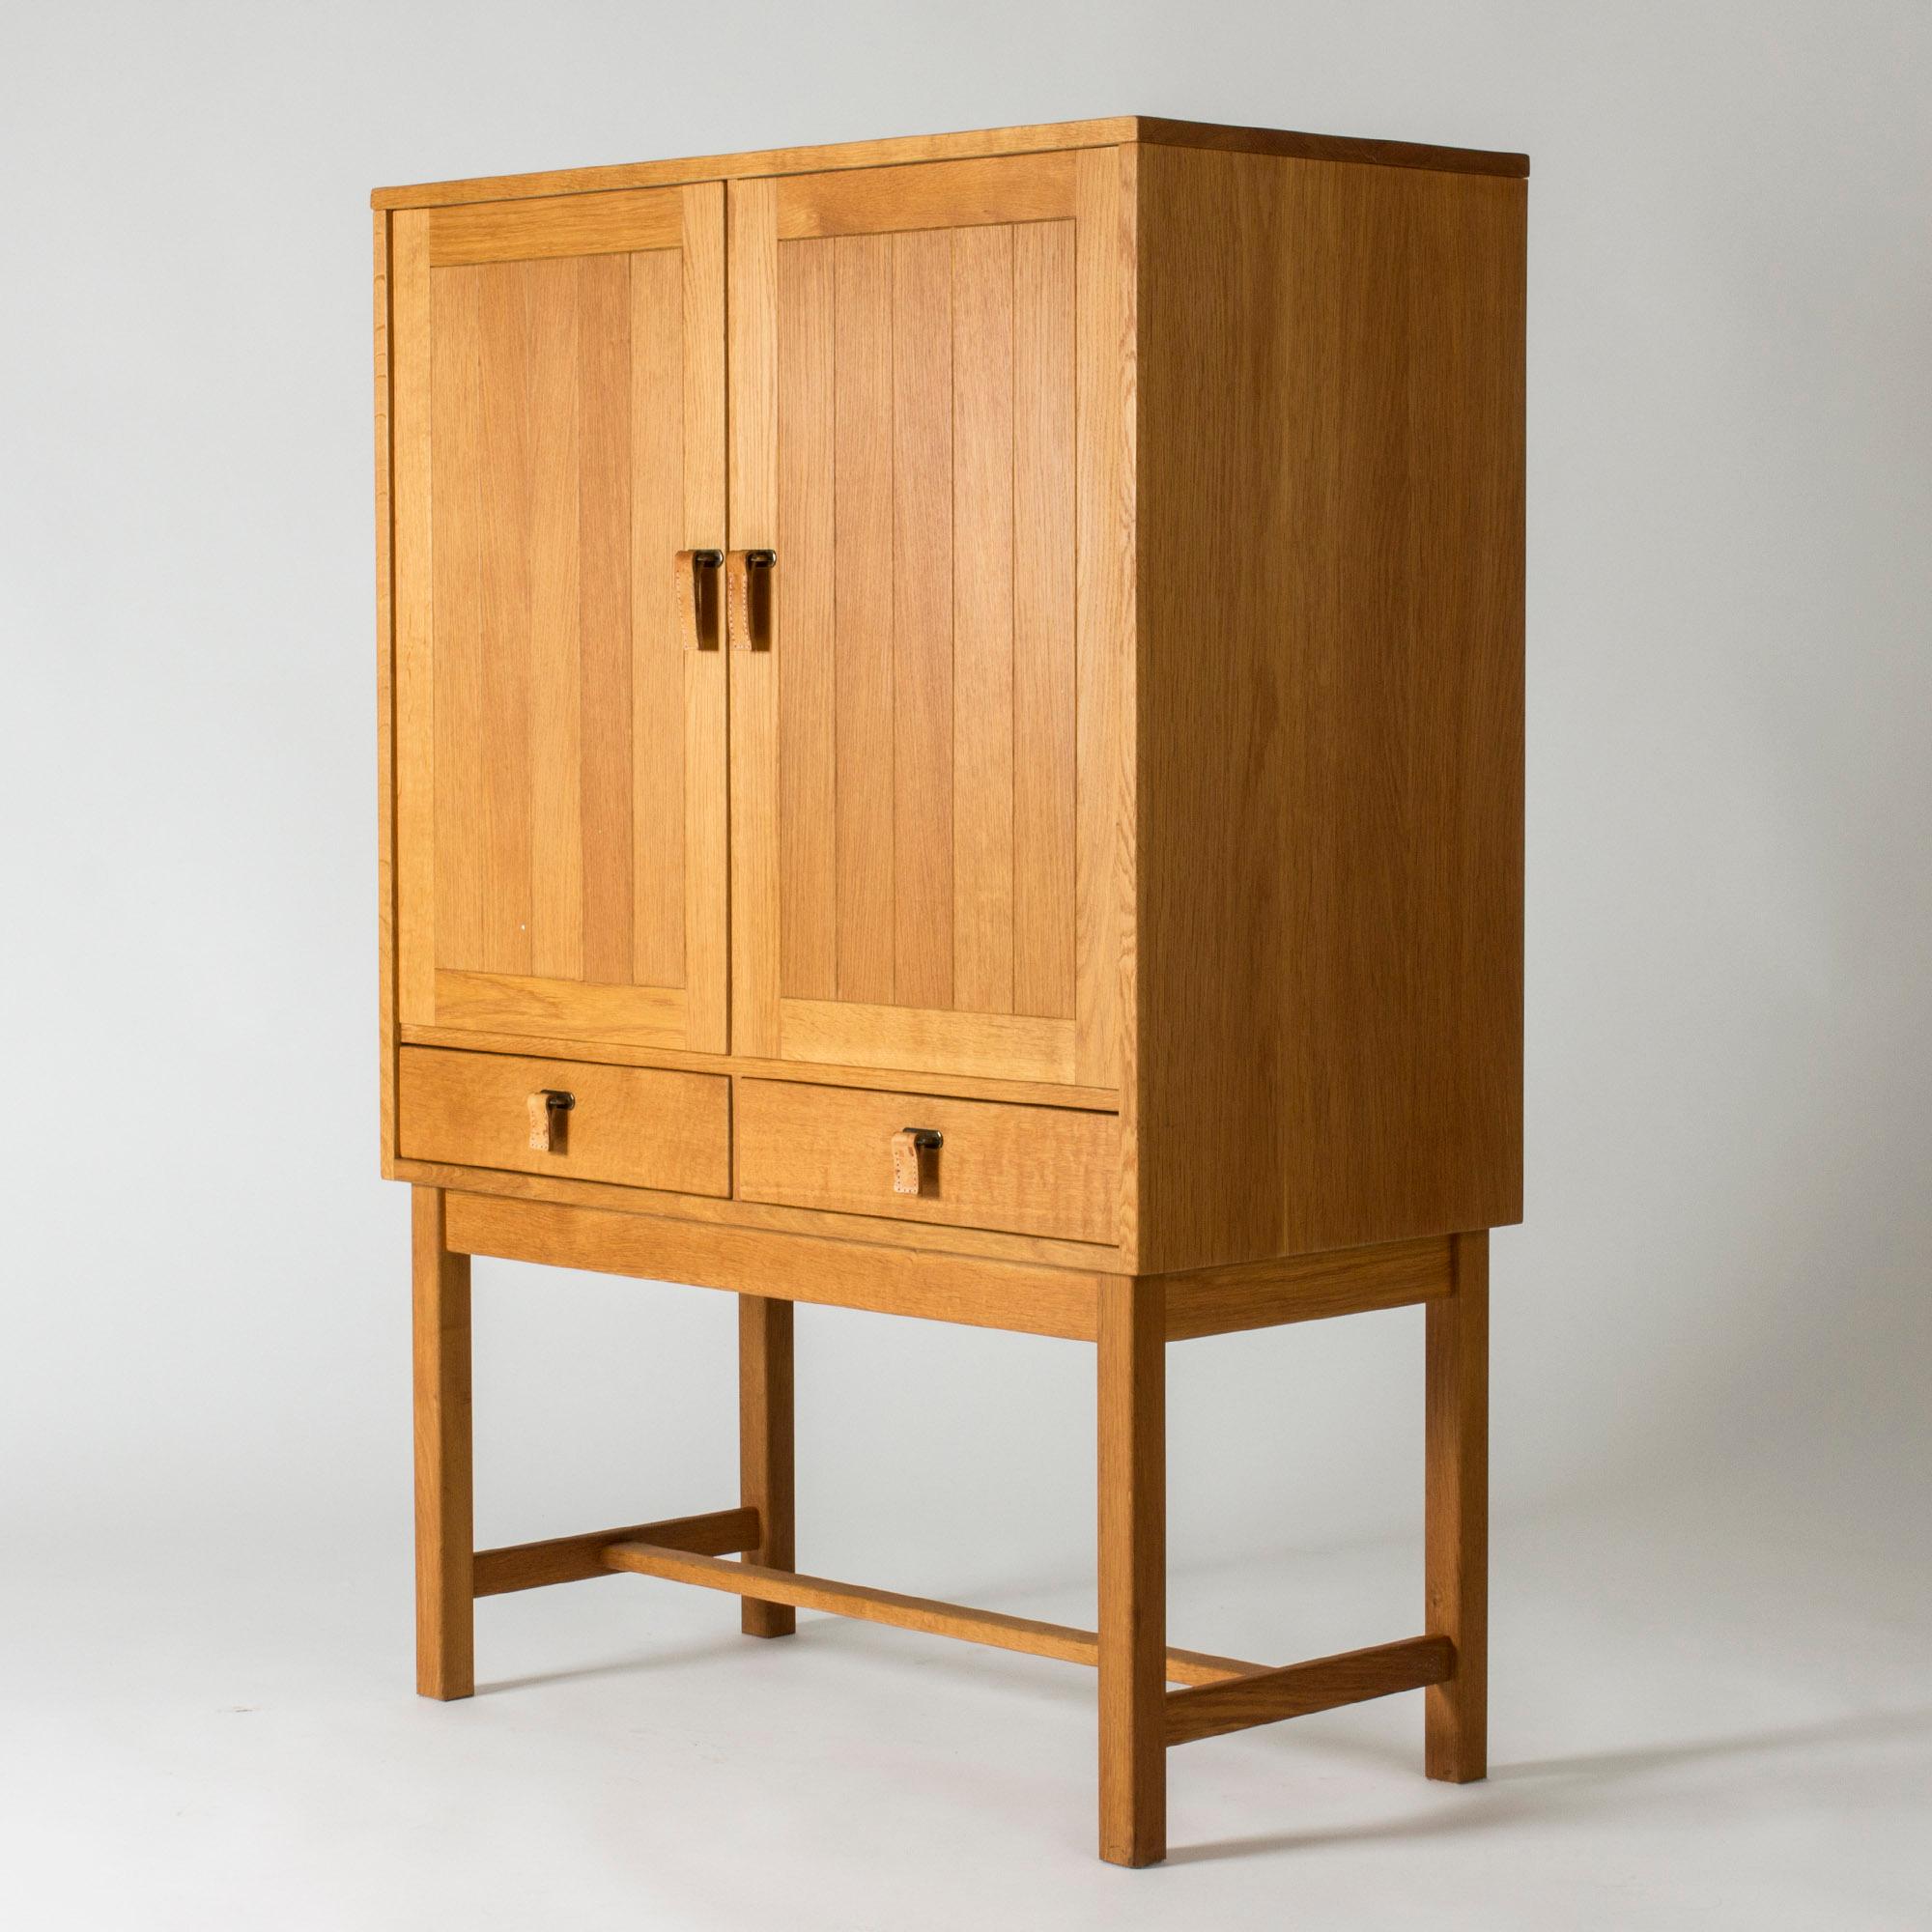 Cool oak cabinet by Kurt Østervig, in a neat size and with a timeless look. Strict lines, decor of embossed stripes on the fronts. Very nice leather strap handles with decorative white seams.